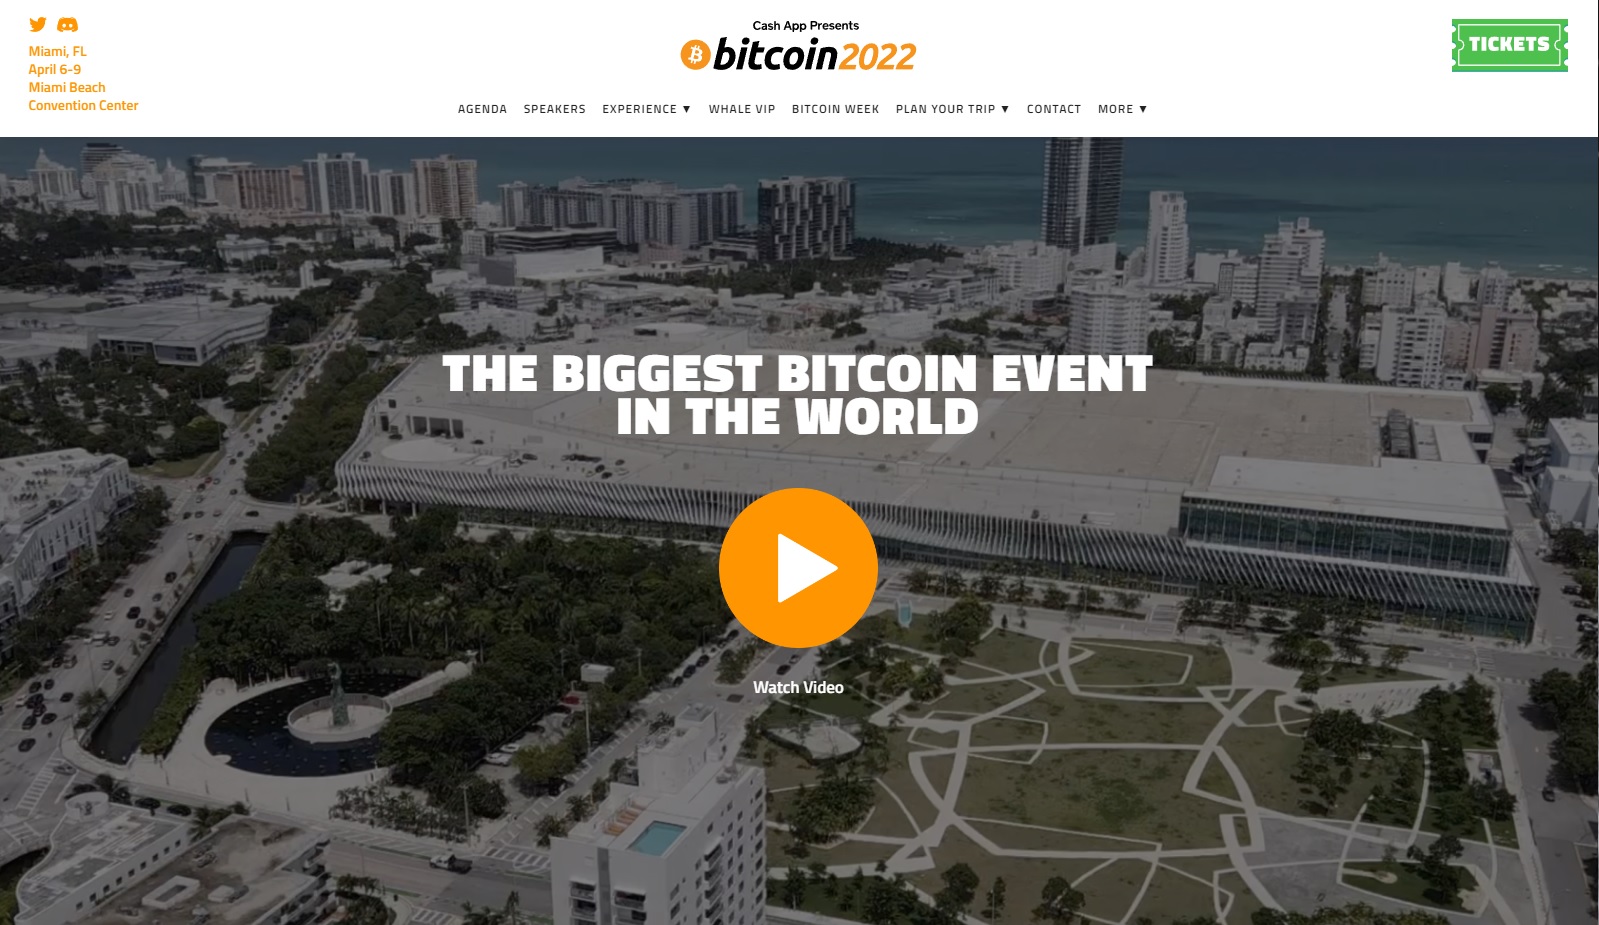 BAI Involved in 2022 Bitcoin Conference and Bitcoin Week